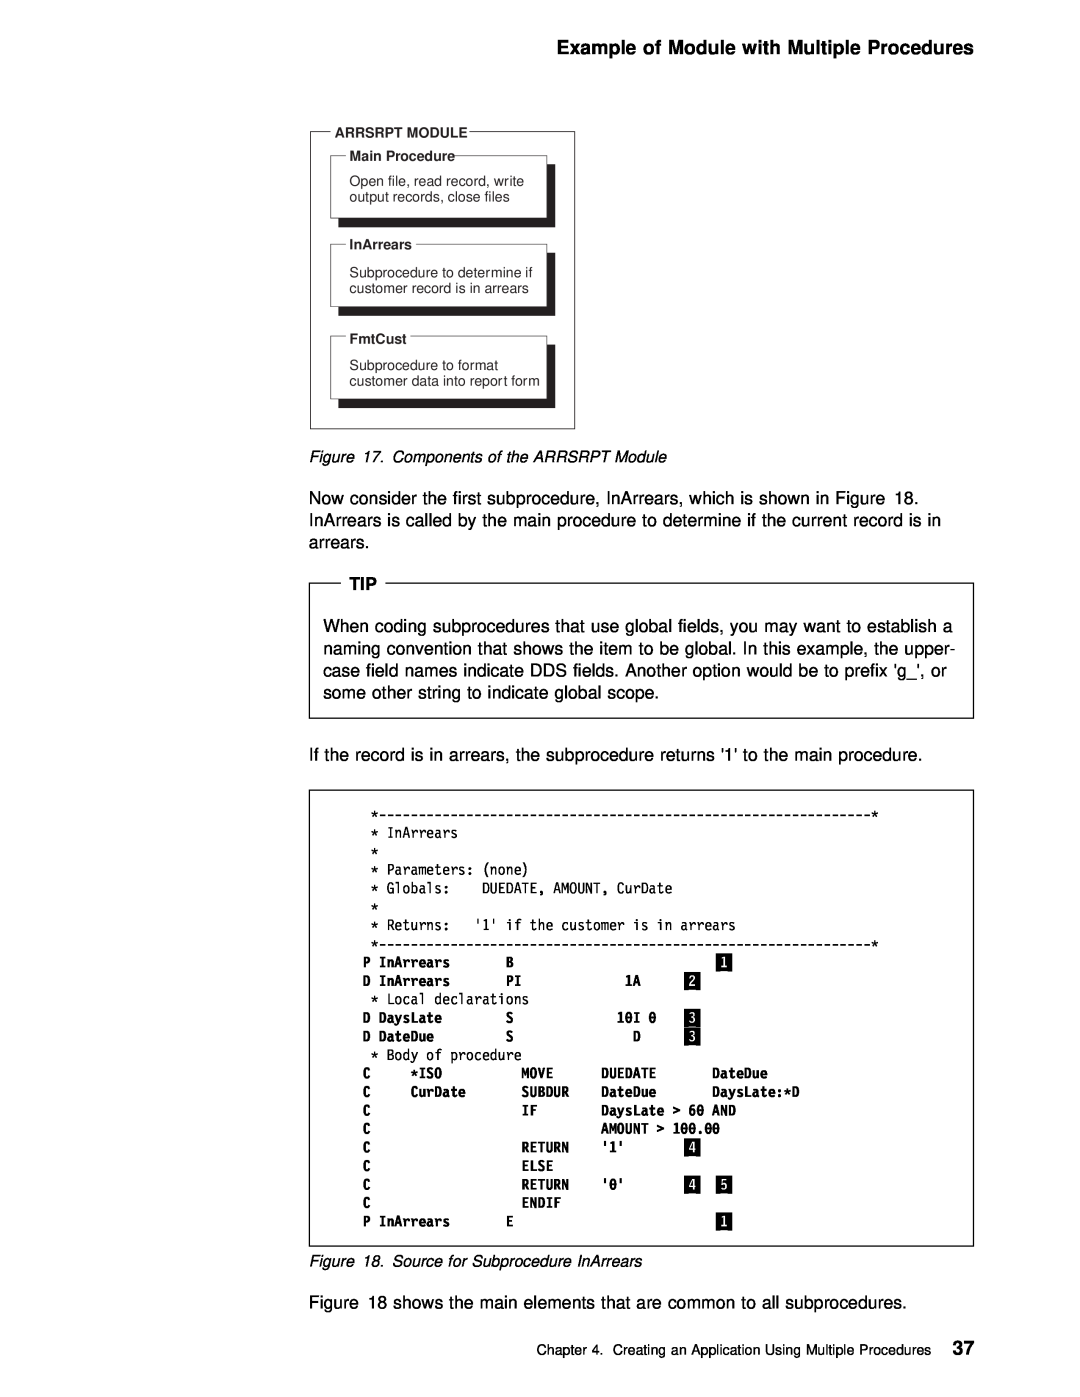 IBM AS/400 manual Example of Module with Multiple Procedures 